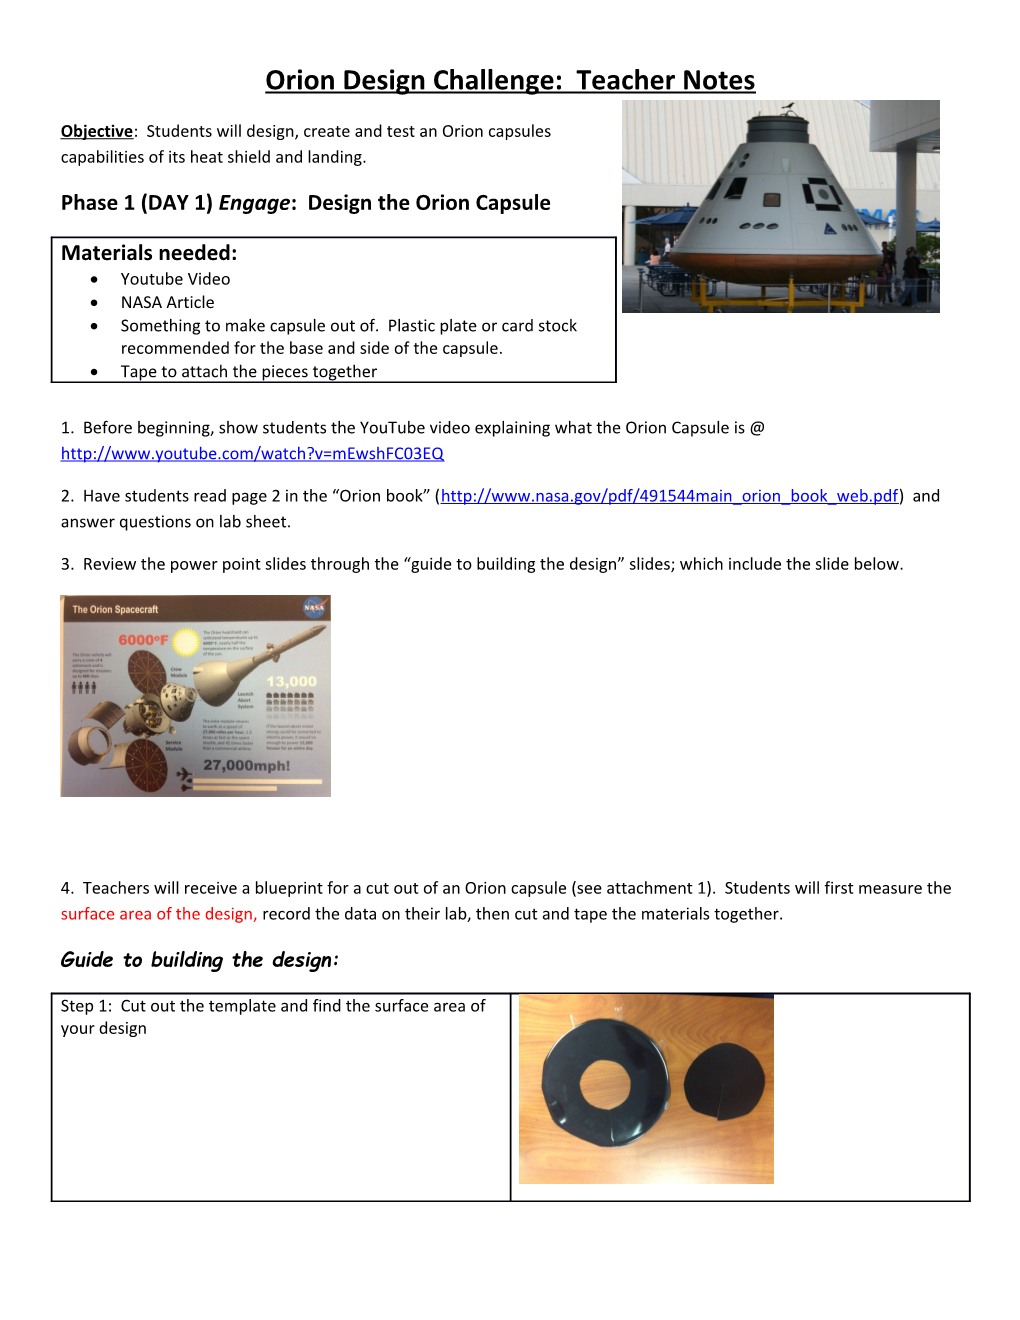 Phase 1 (DAY 1)Engage: Design the Orion Capsule